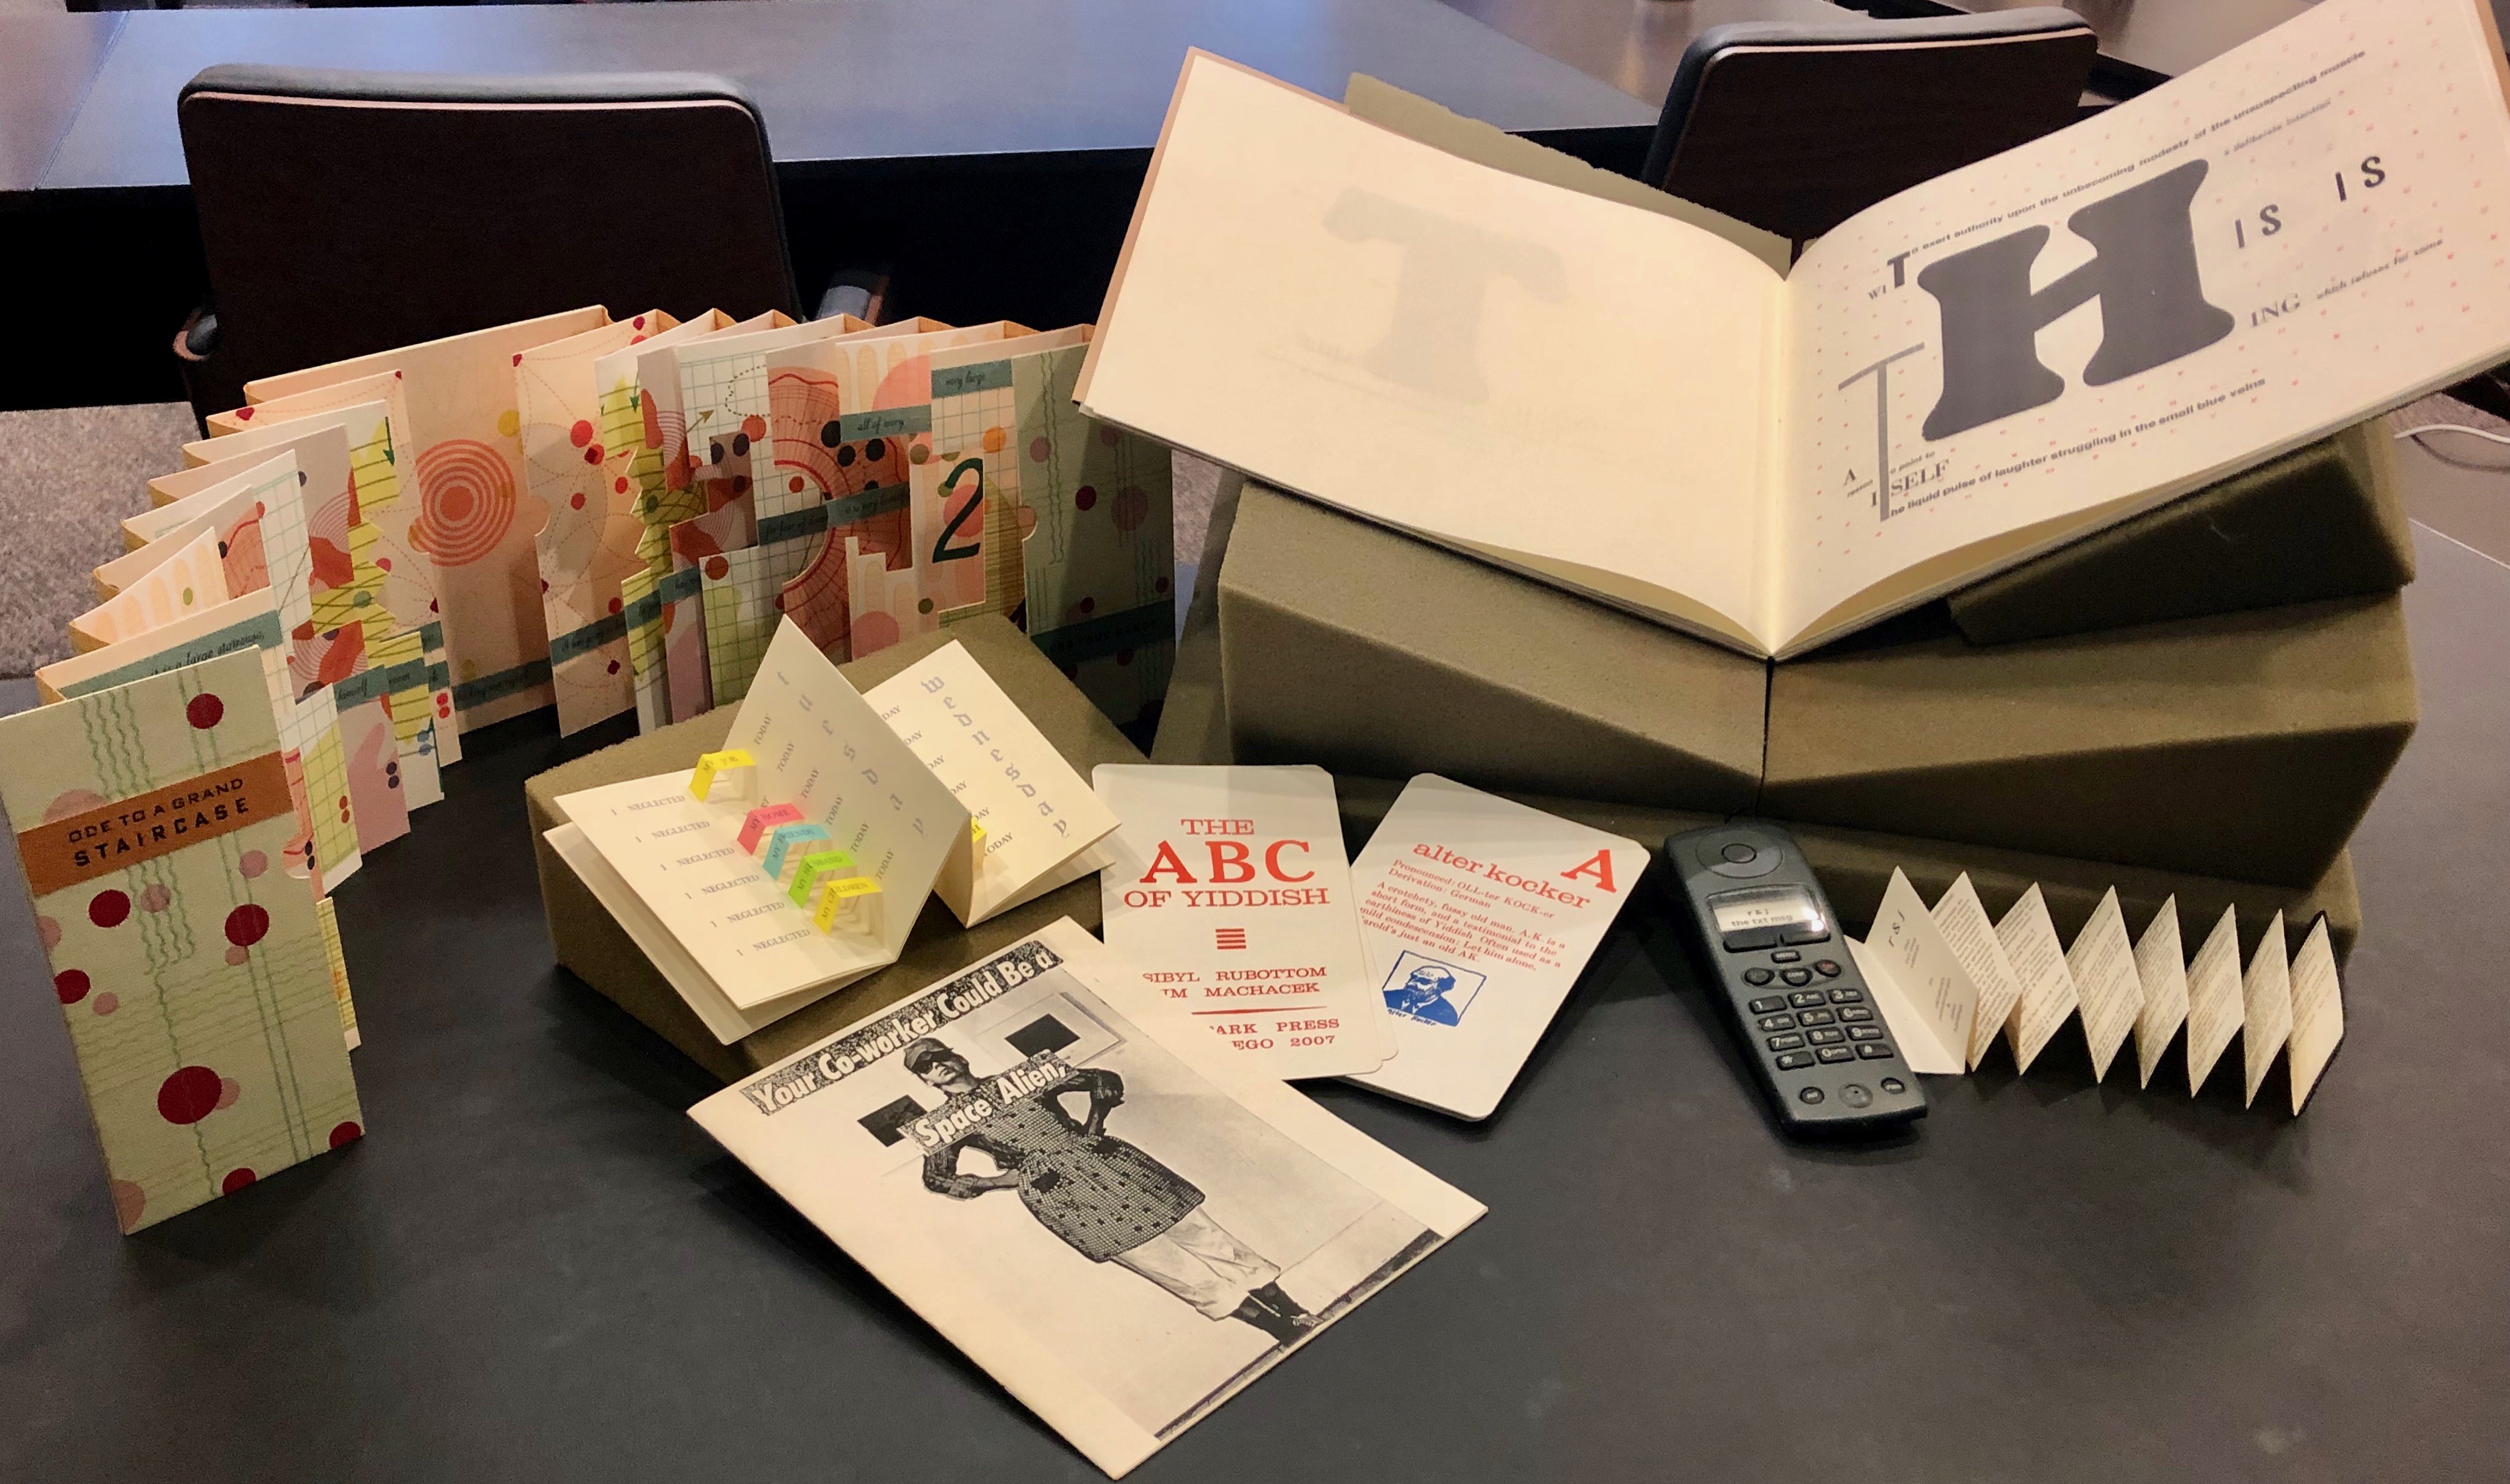 A collection of artists' books from the Kislak Center for Special Collections. Books by (clockwise from upper right): Johanna Drucker, Elizabeth Pendergrass, Sibyl Rubottom, Tana Kellner, Patricia M. Smith, and Julie Chen. Photo by Camille Davis.